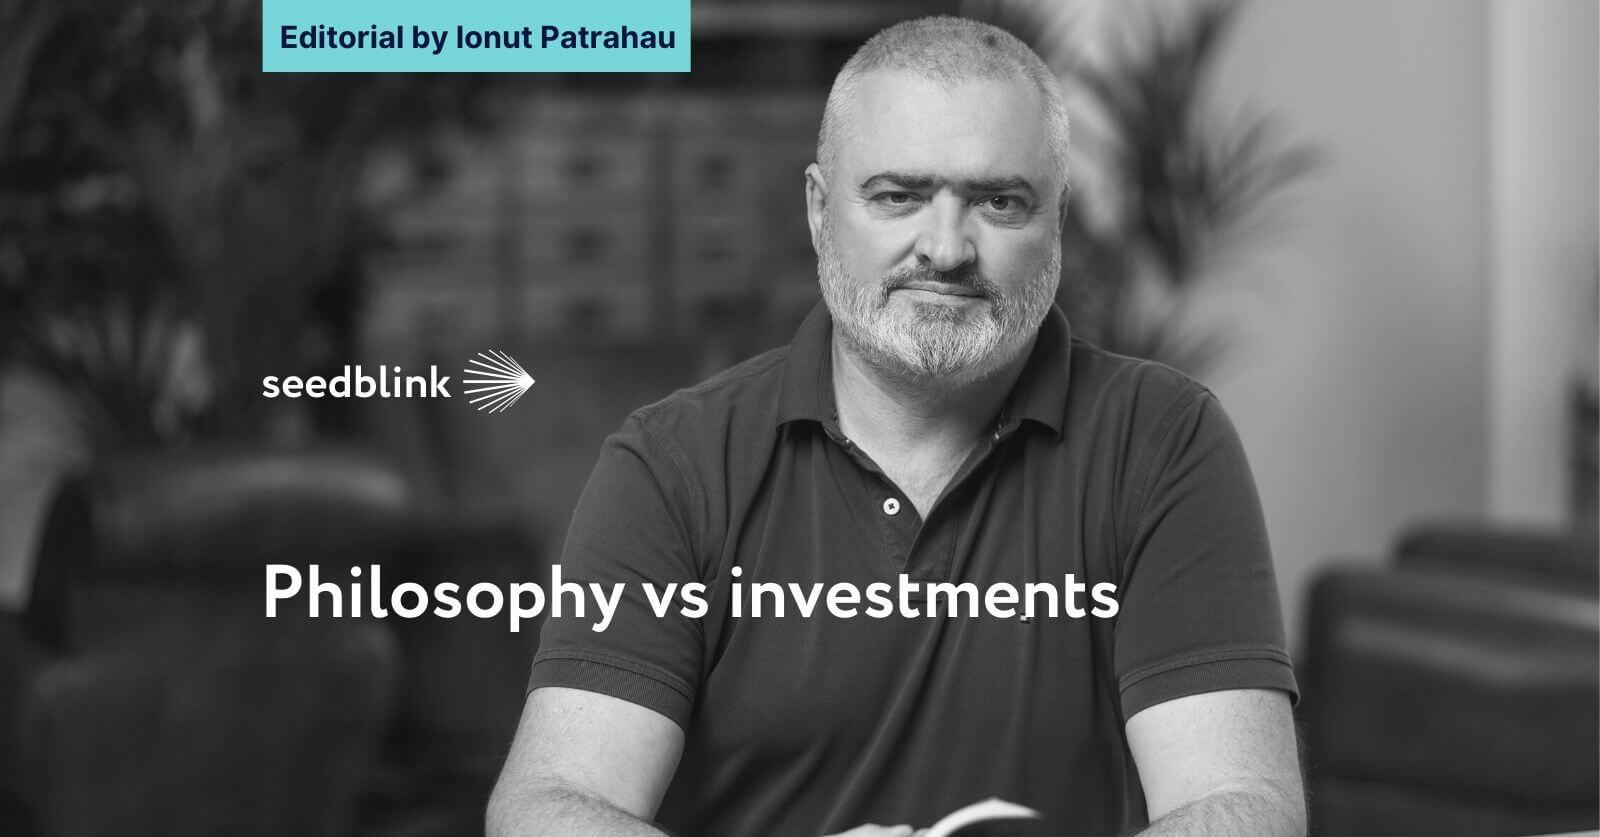 Philosophy vs investments - Editorial by Ionut Patrahau